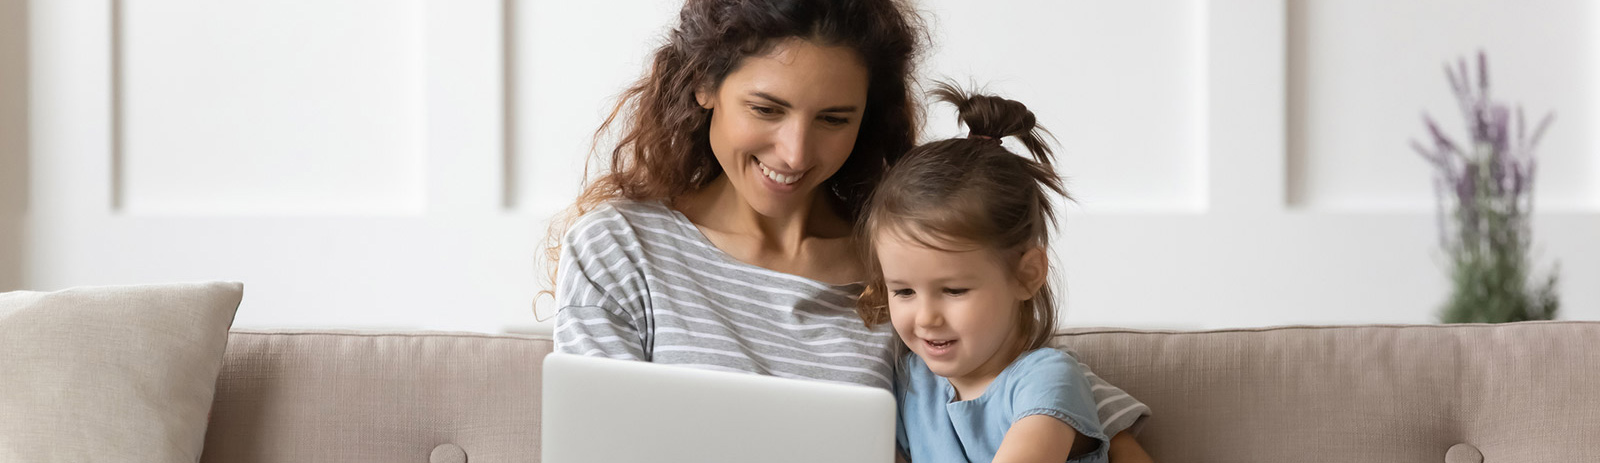 Mother and child using laptop in living room